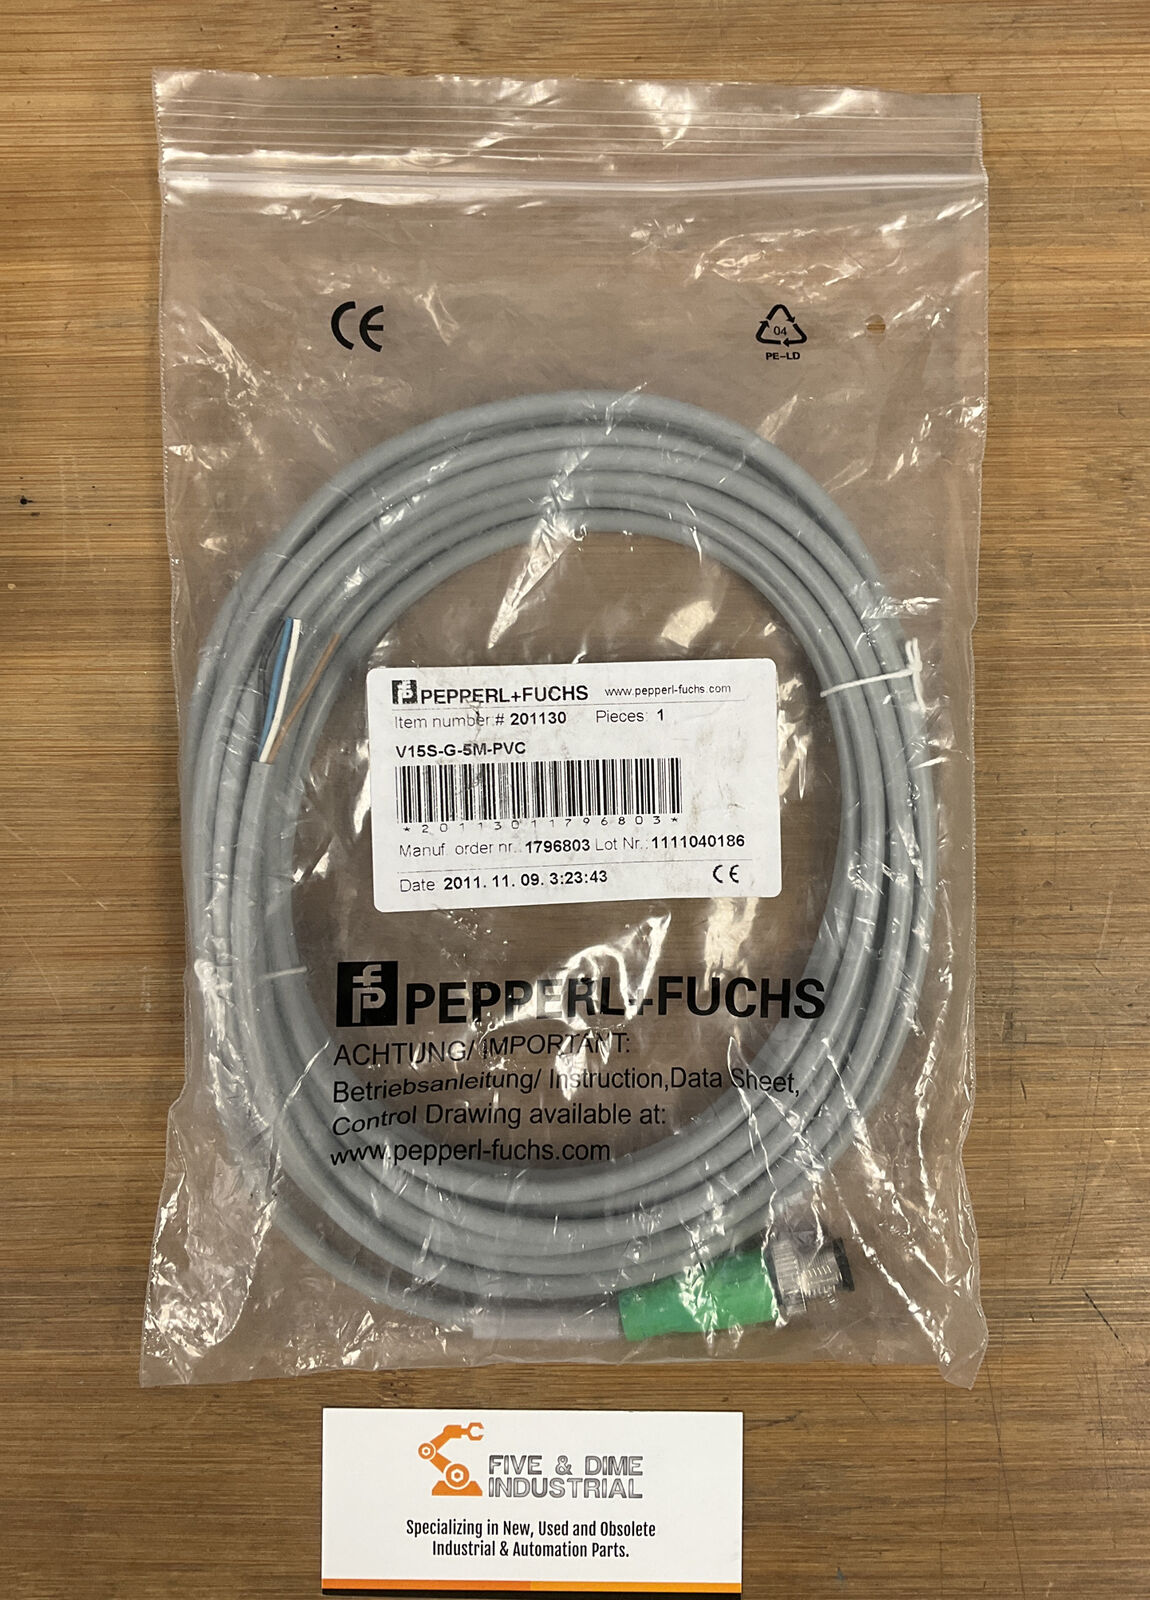 Pepperl+Fuchs V15S-G-5M-PVC - 201130 New Cable Connector (CL308)